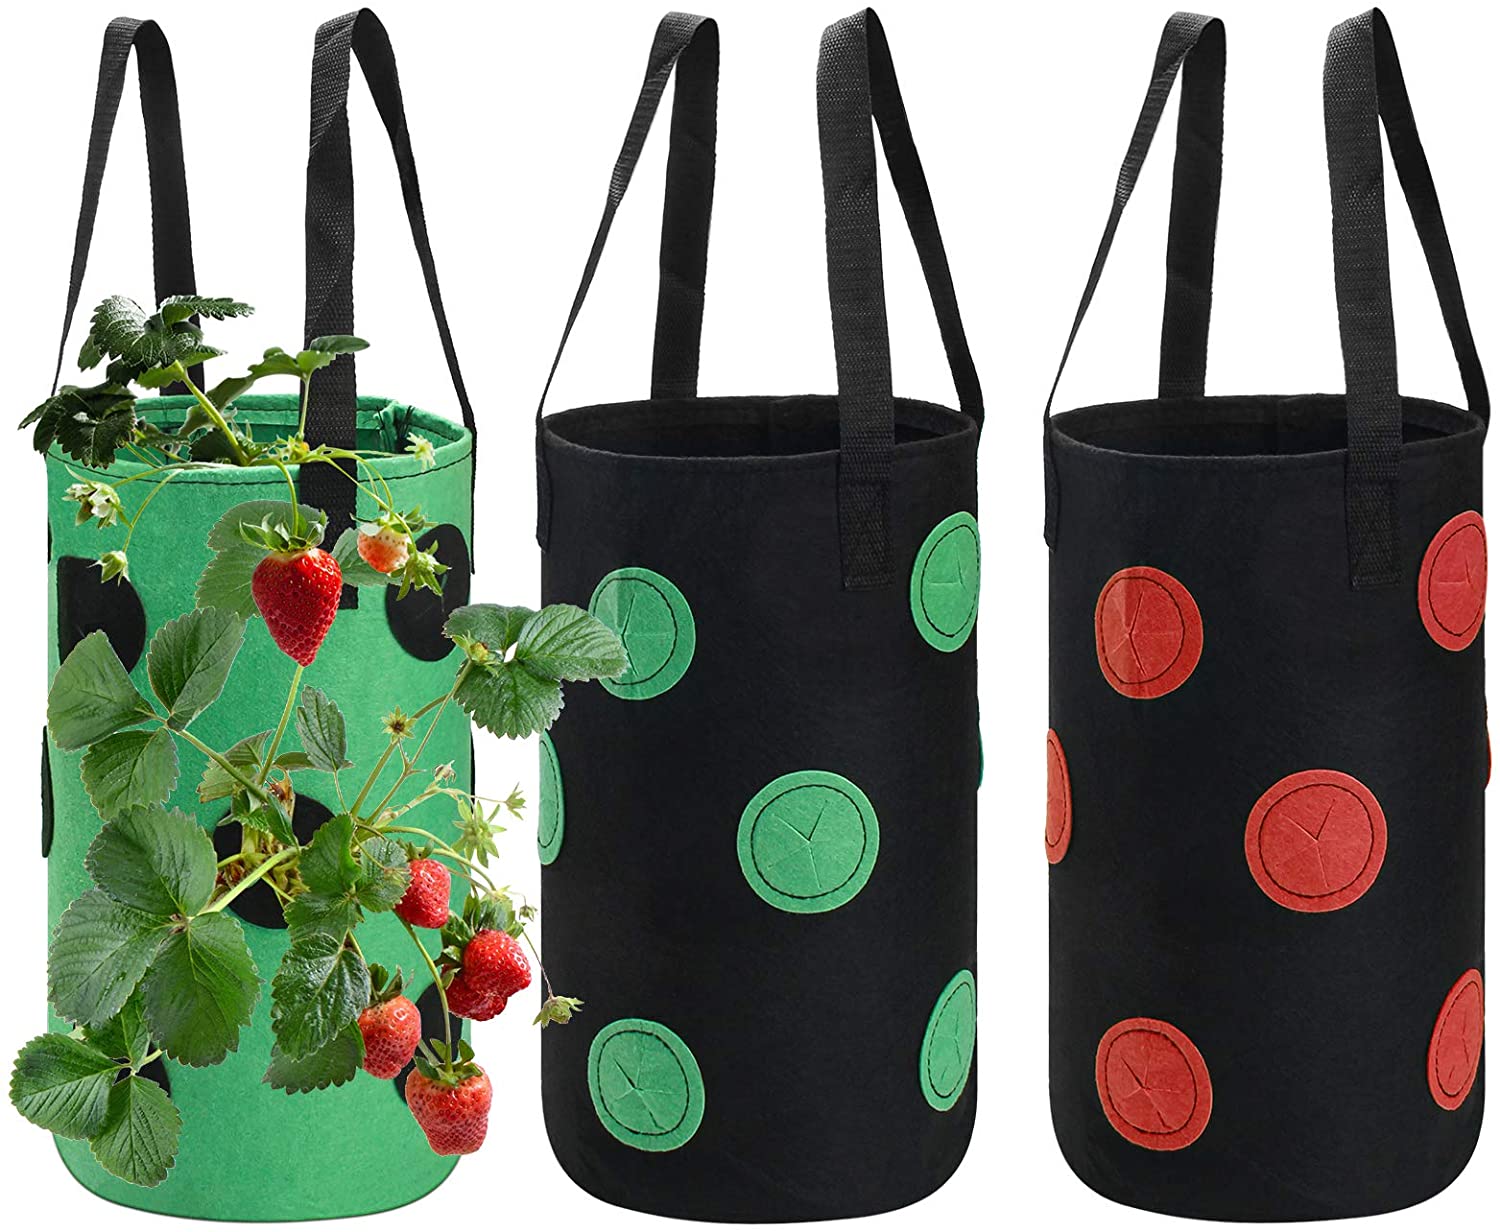 Big discounting Mushroom Grow Bags - Strawberry Grow Bags 3 Gallon Planting With 12 Grow Pouches Plant Growing Hanger Bag – Virex